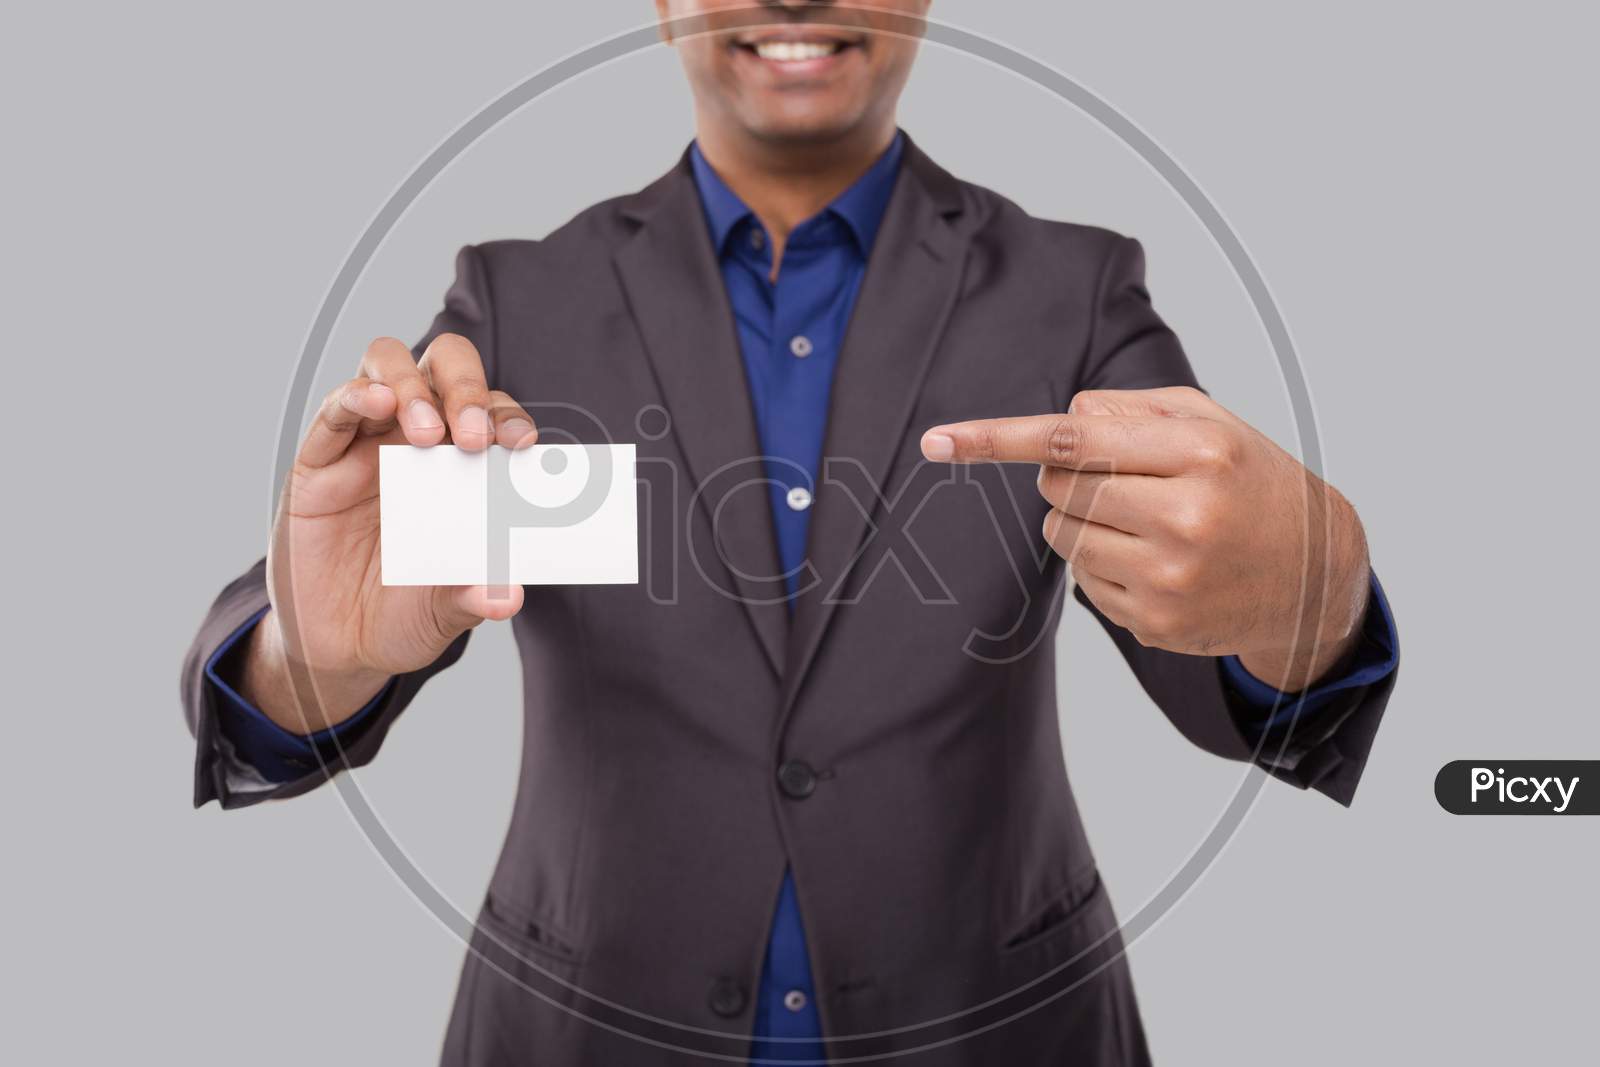 Businessman Pointing At Visit Card Isolated Close Up. Indian Business Man Blank Card In Hand